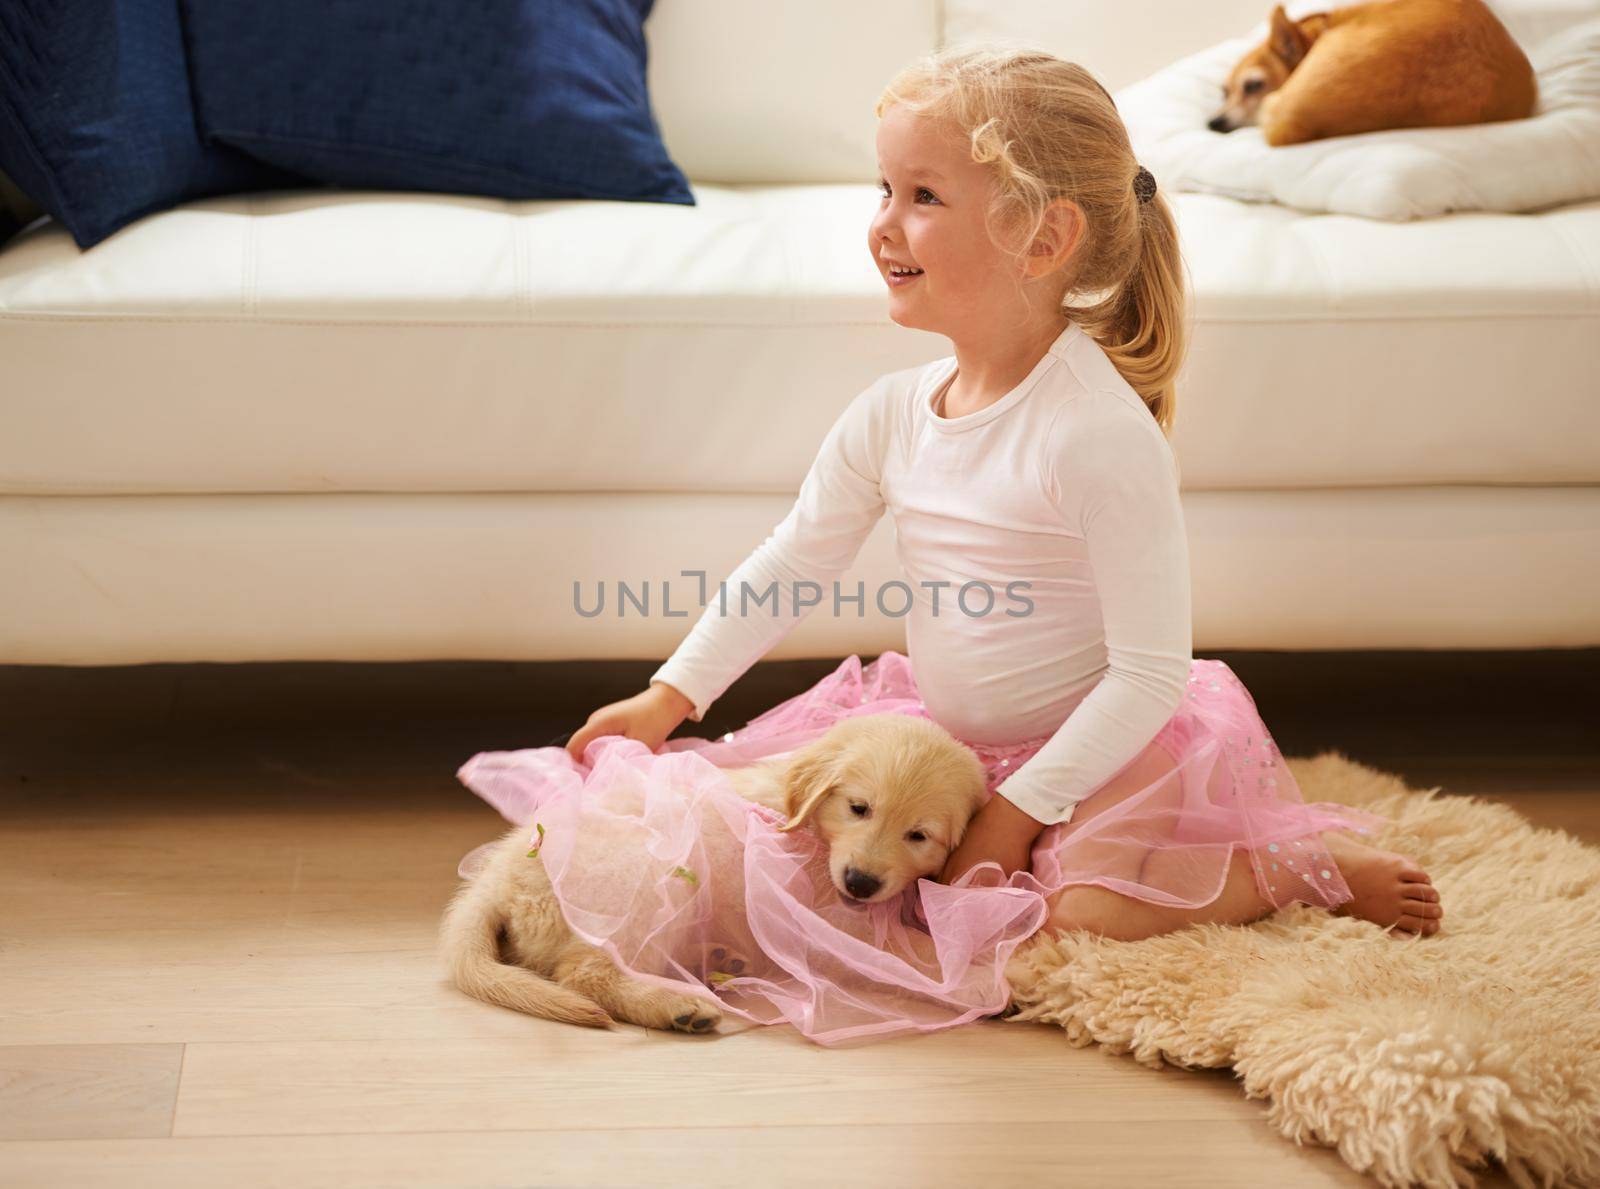 Shot of a little girl in a tutu playing with a puppy.